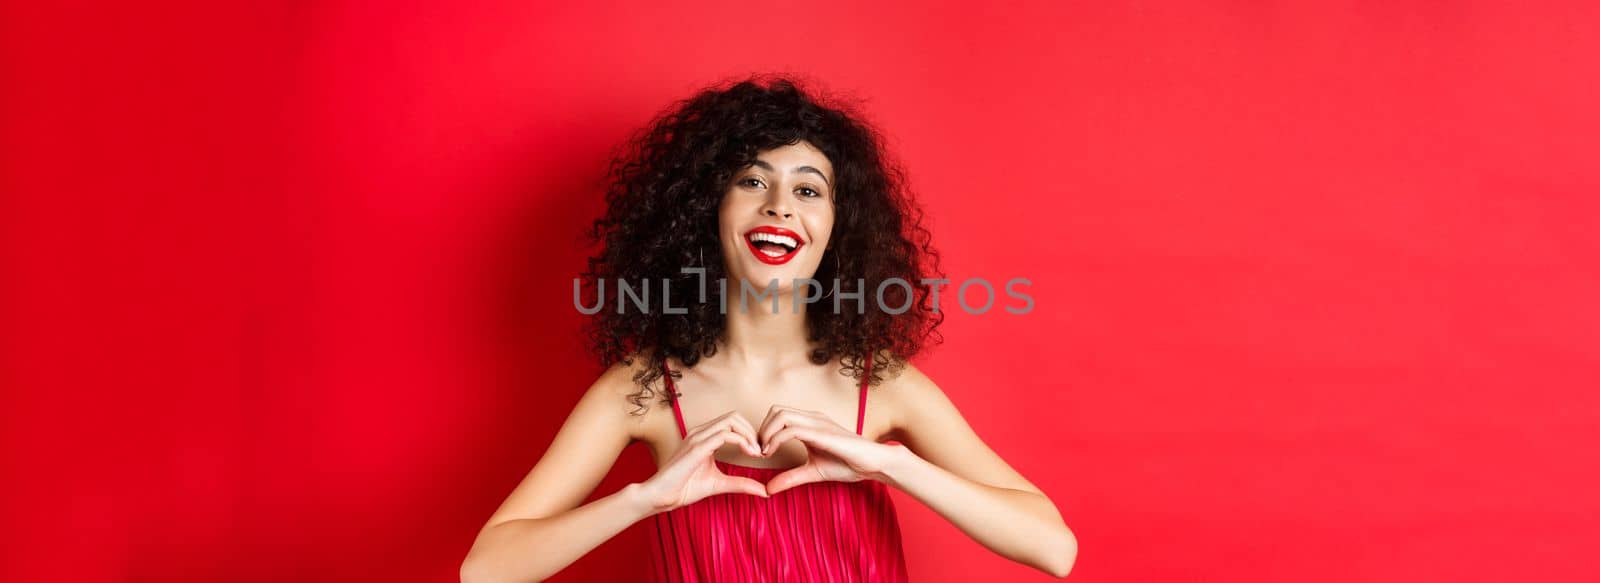 Beautiful woman with curly hair, red dress, showing heart symbol and smiling happy, studio background.